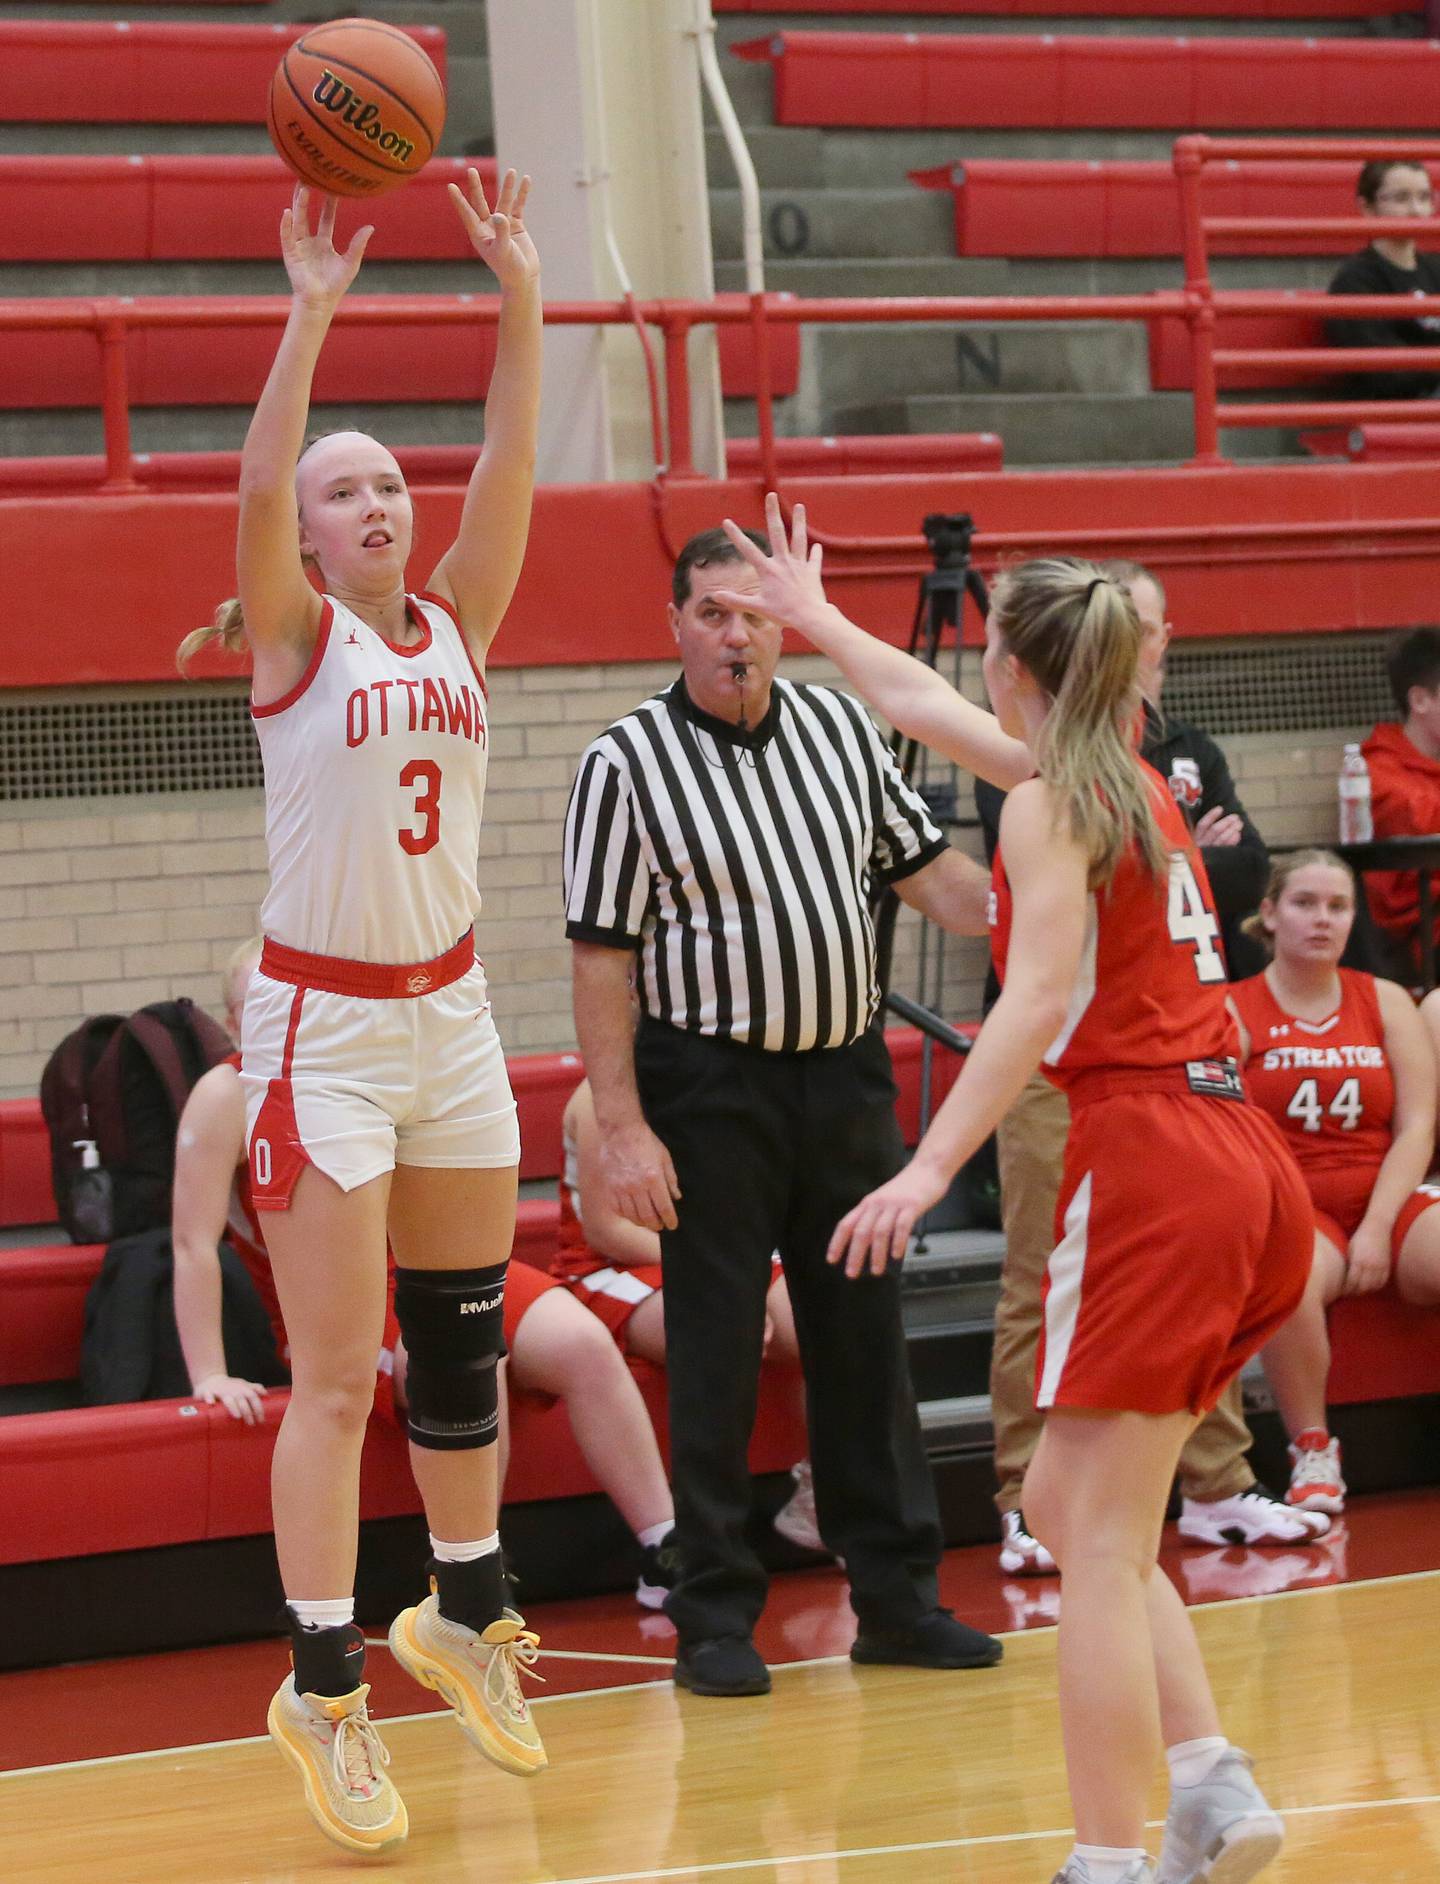 Ottawa's Skylar Dorsey shoots a three-point basket over Streator's Joey Puetz during the Lady Pirate Holiday Tournament on Wednesday, Dec. 20, 2023 in Kingman Gym.